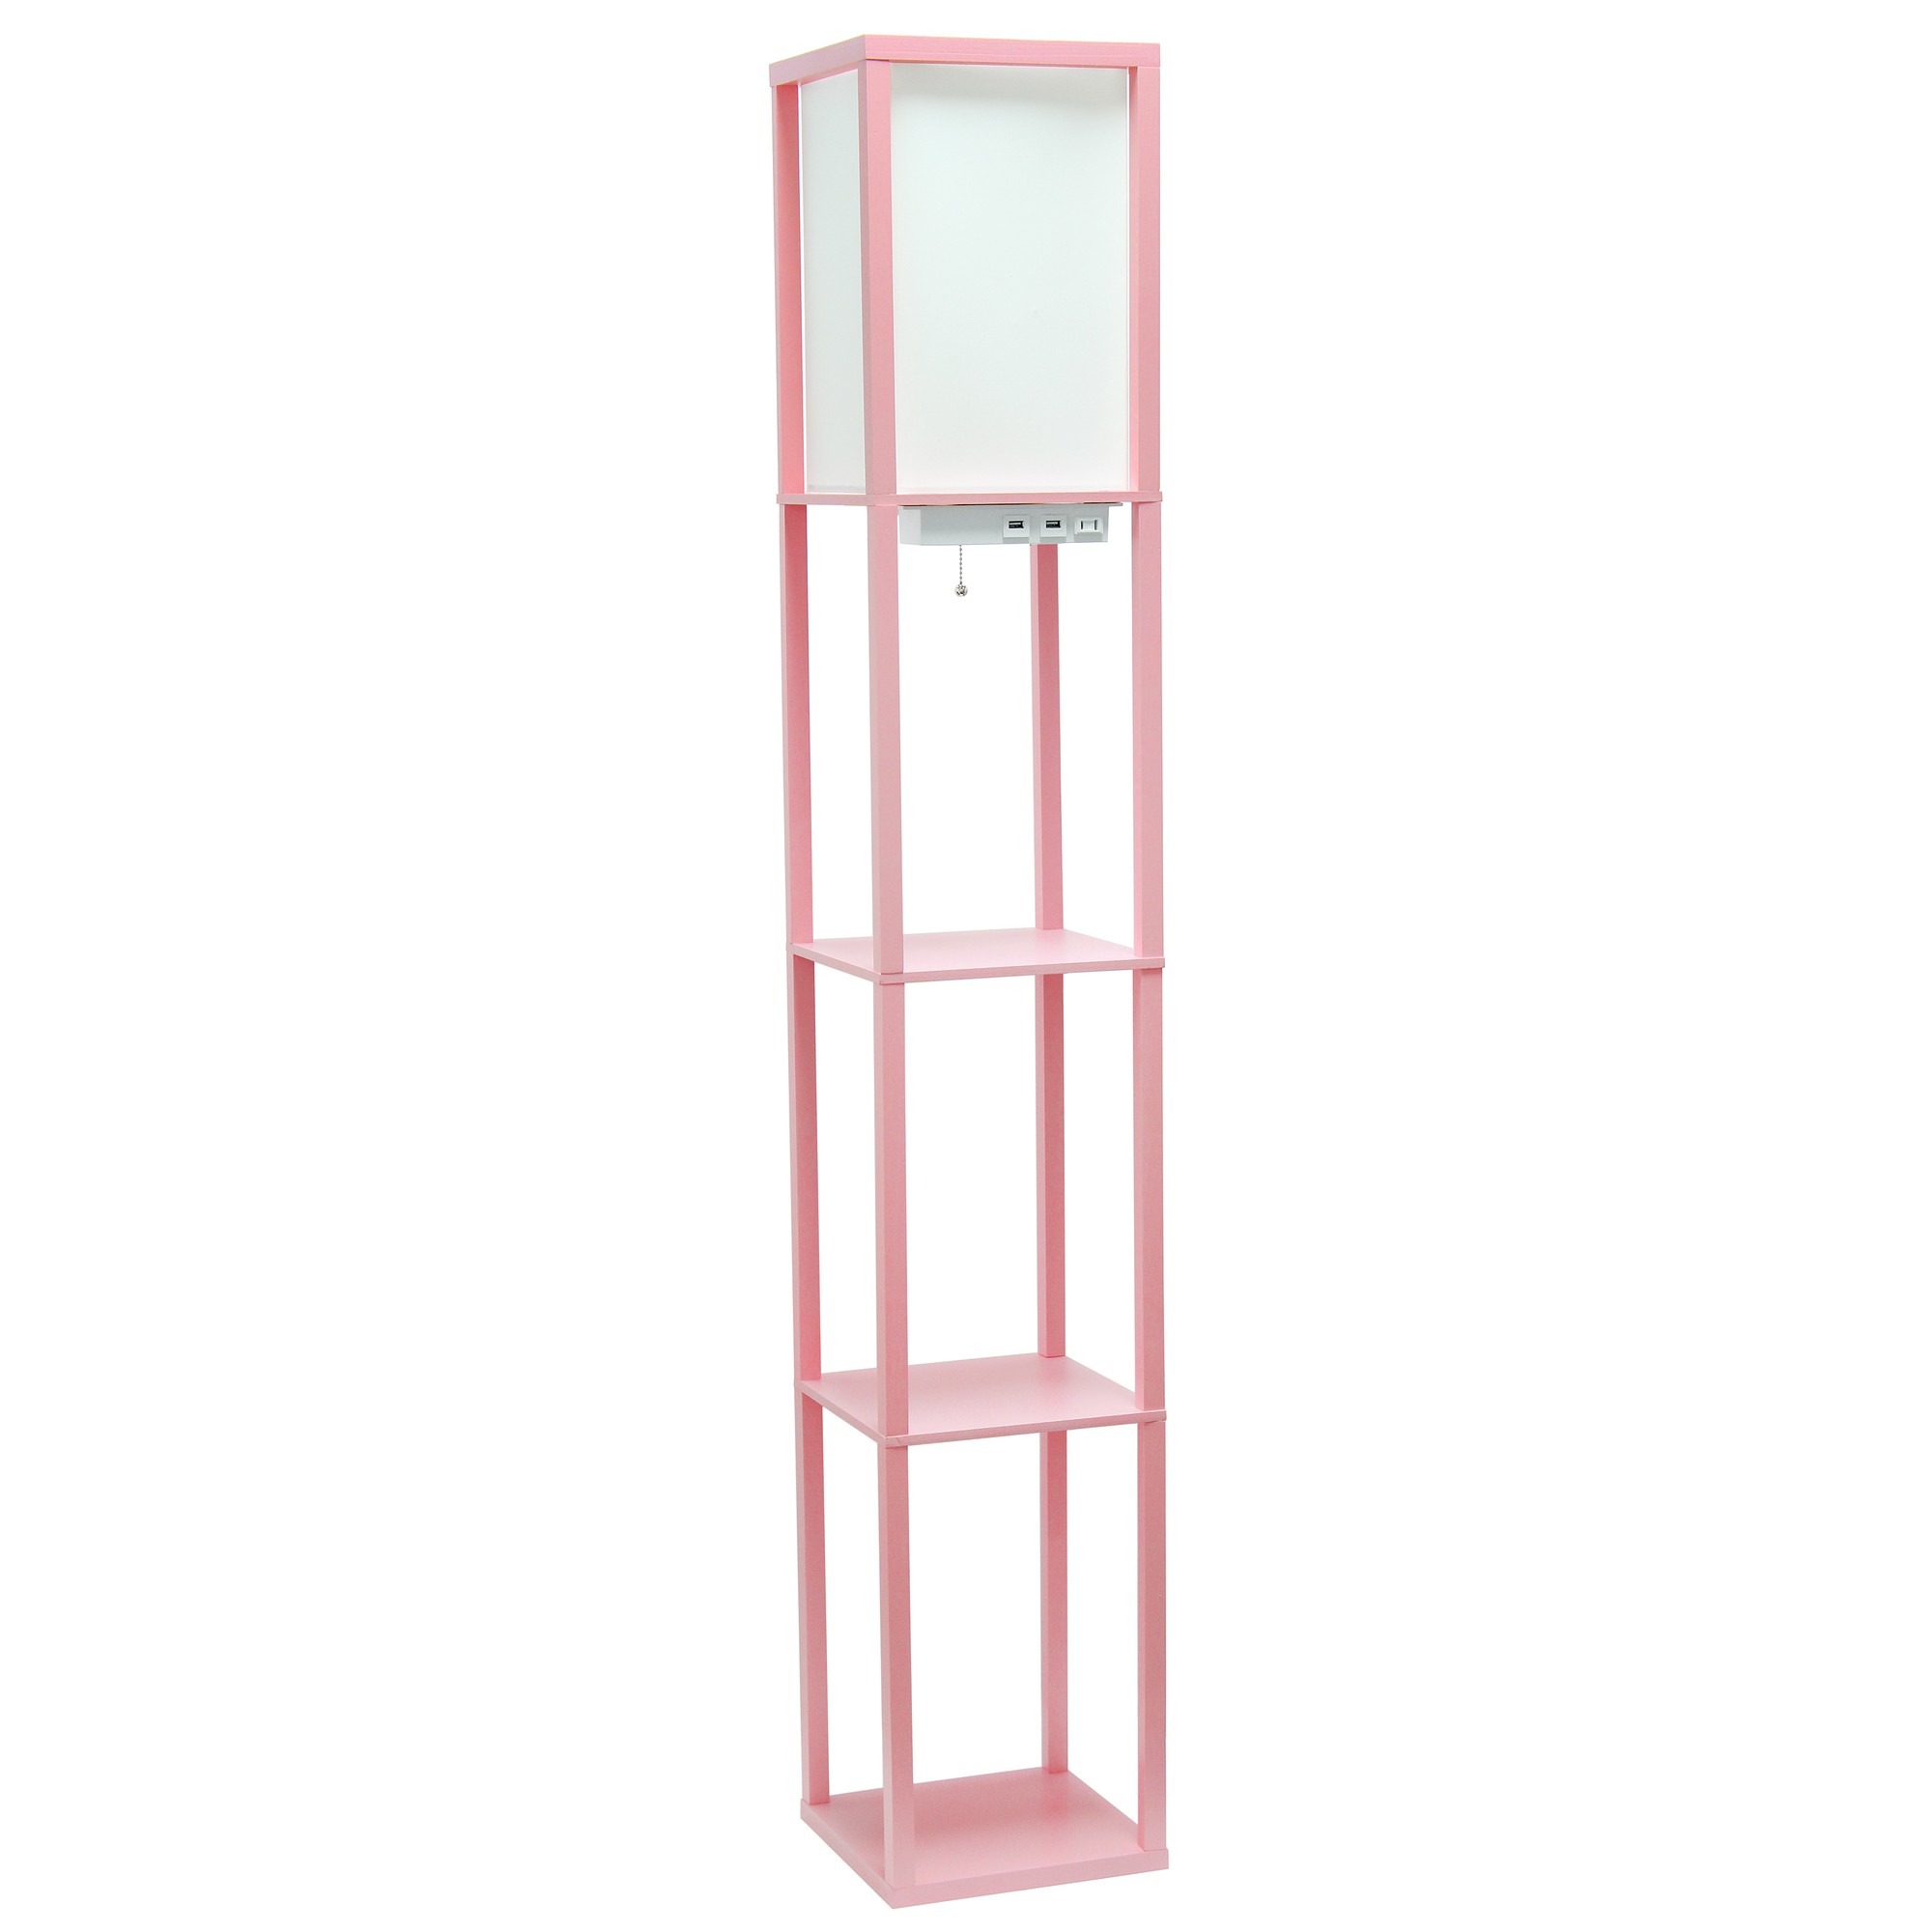 Floor Lamp Etagere Organizer Storage Shelf with 2 USB Charging Ports, 1 Charging Outlet and Linen Shade, Light Pink